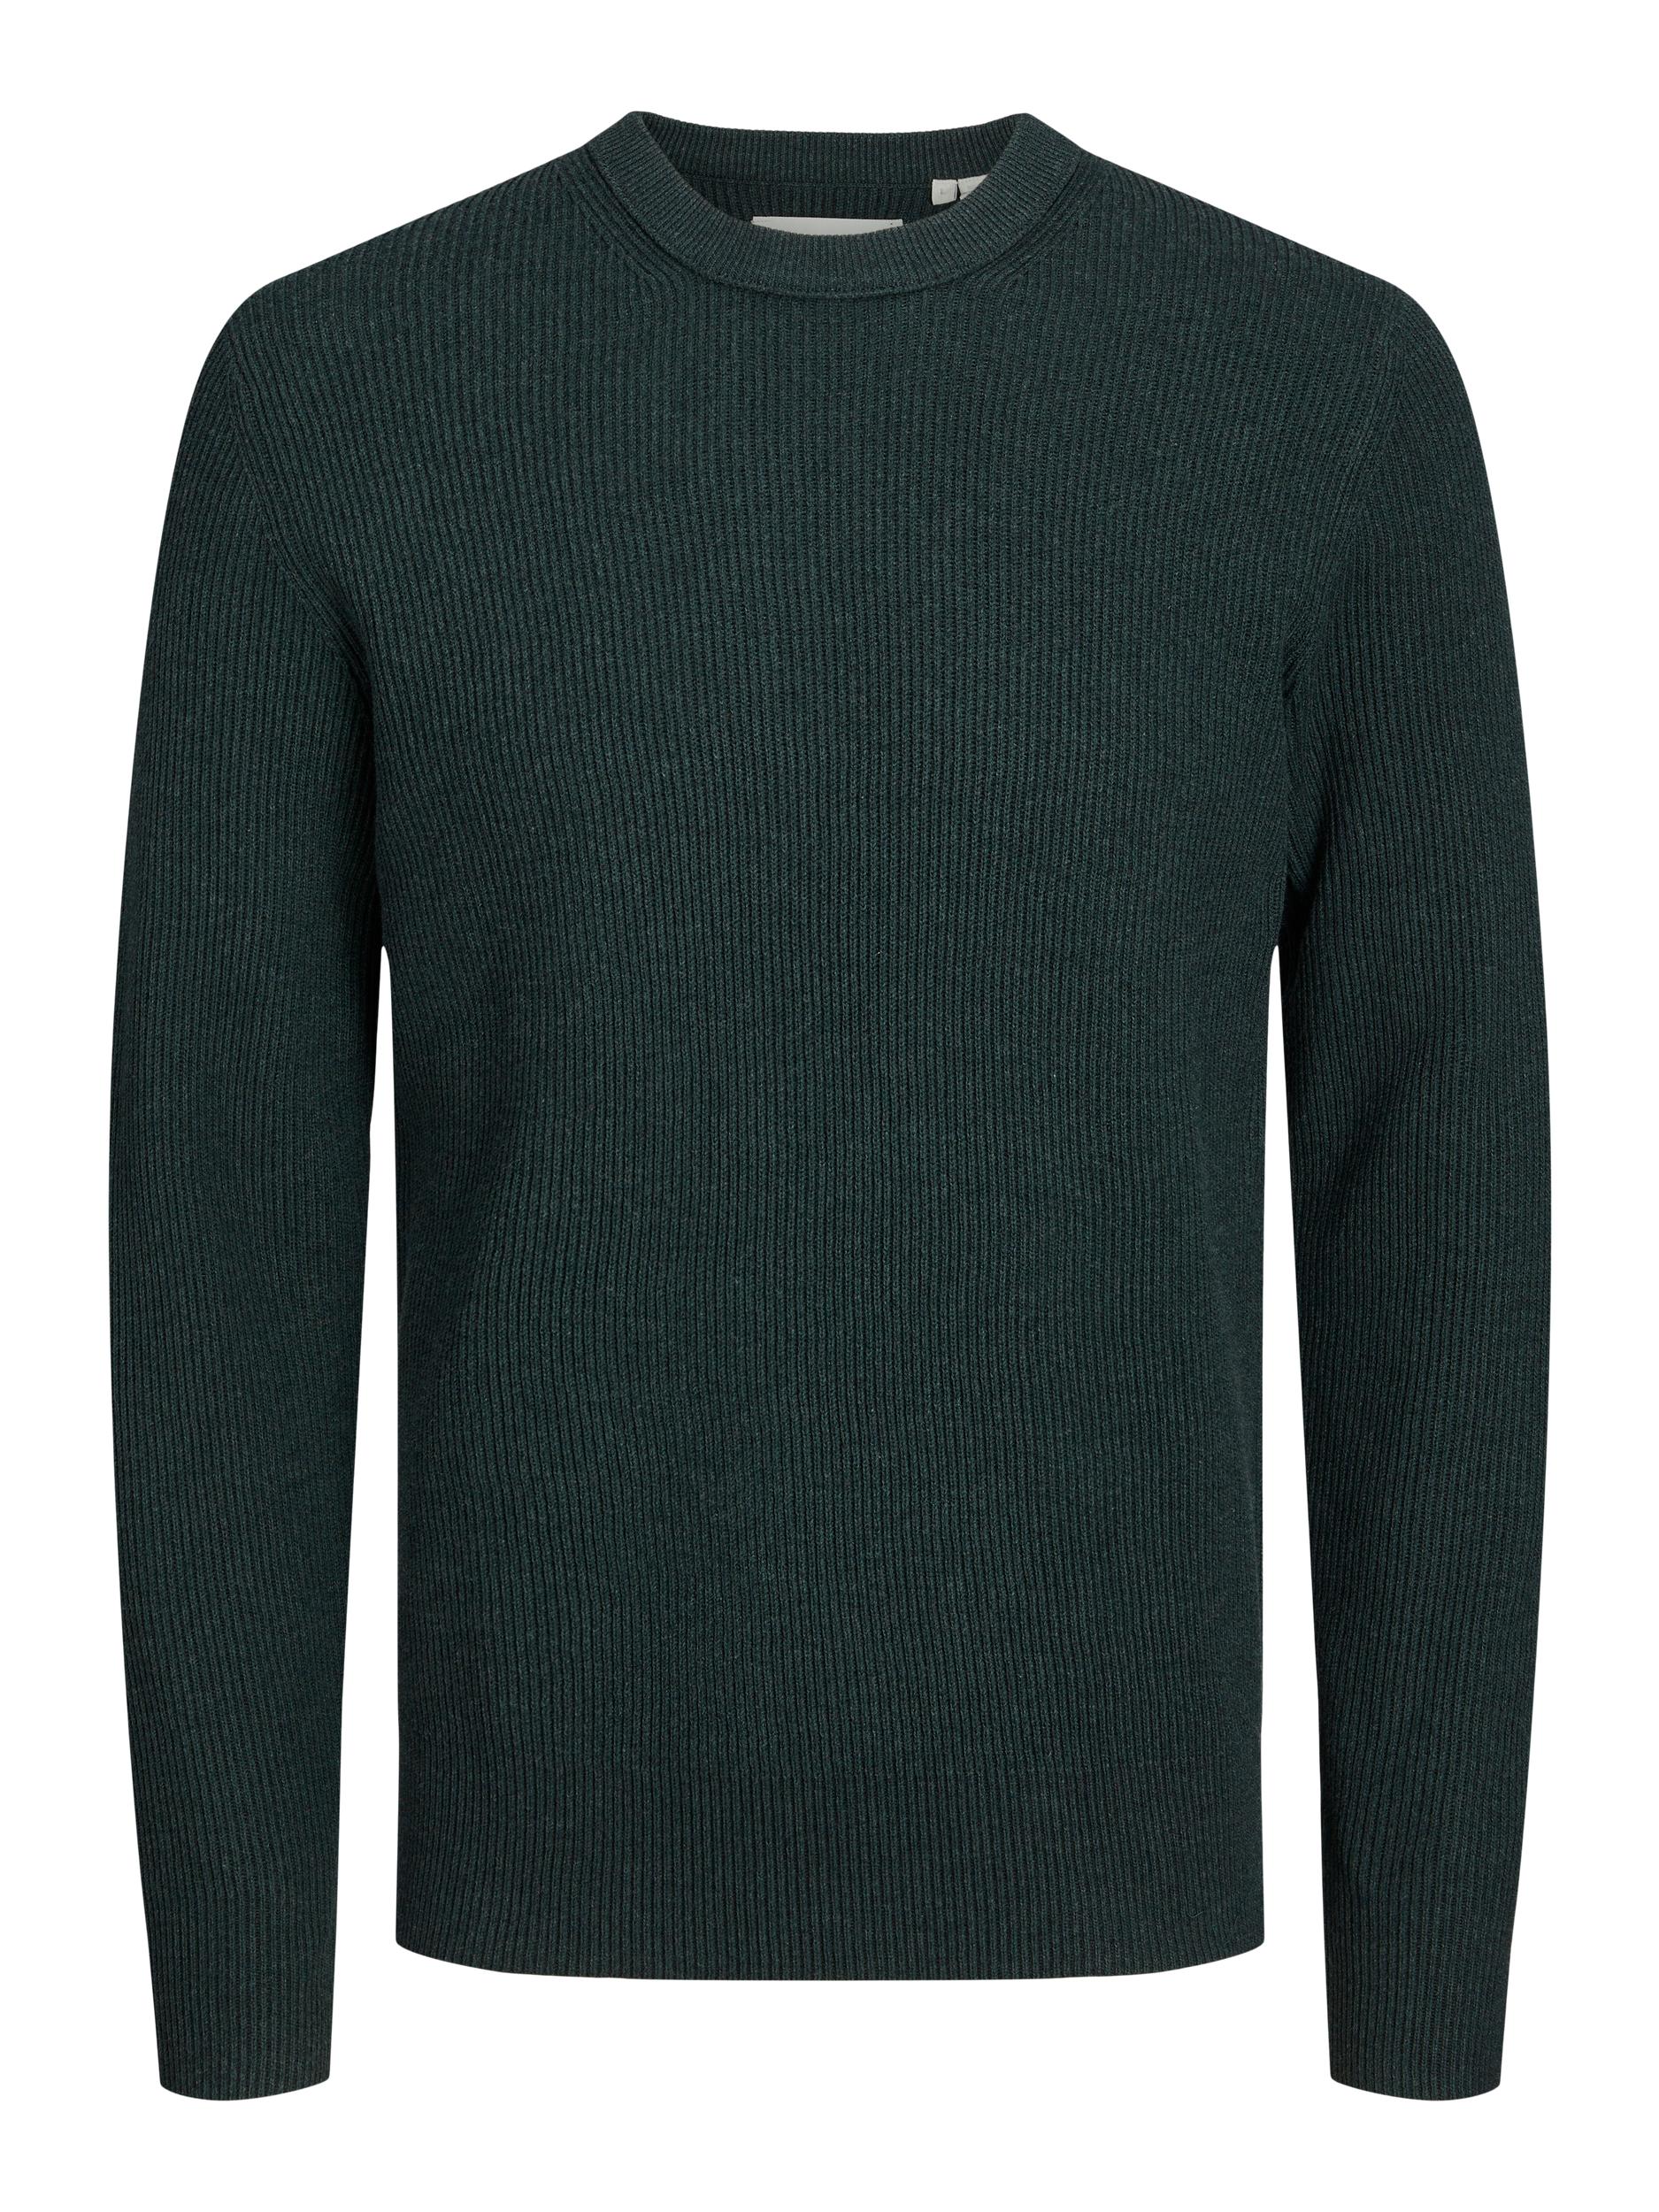 Men's Perfect Knit Crew Neck-Green Gables-Front View